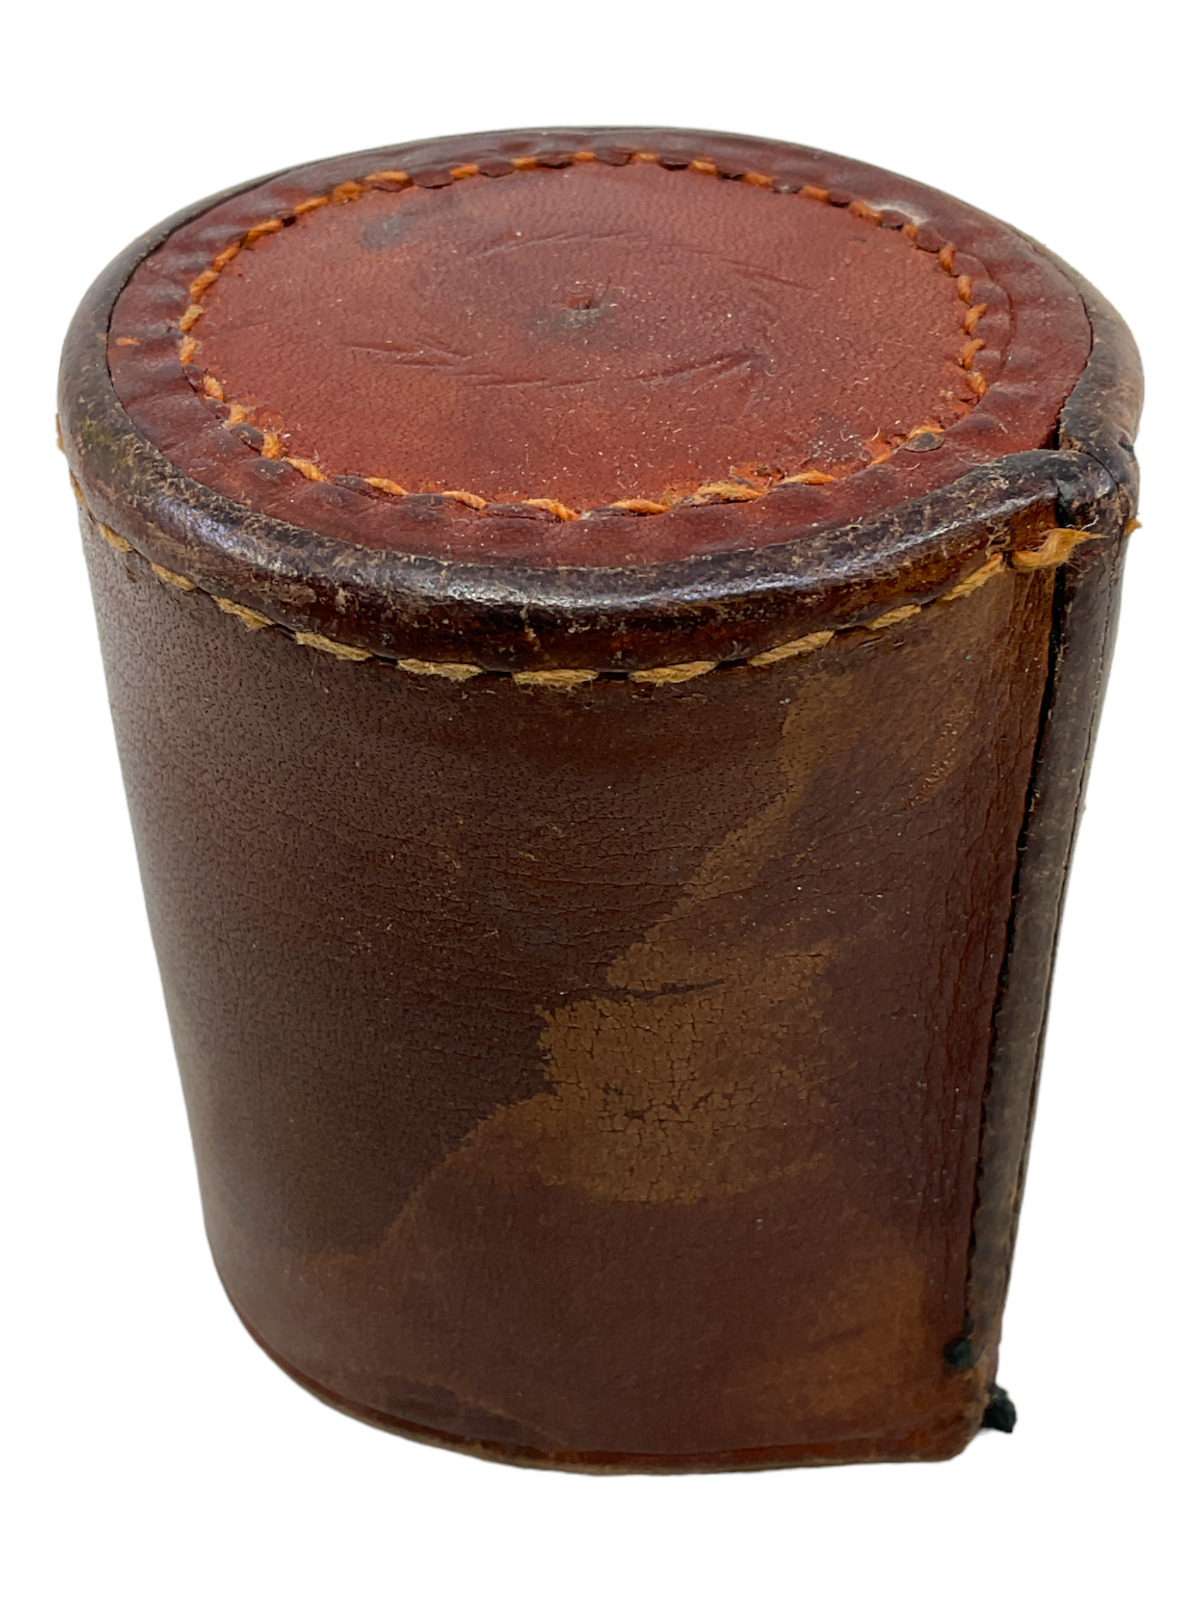 Ww1 British Canadian Bef Cef Leather Telescope Lens Cover